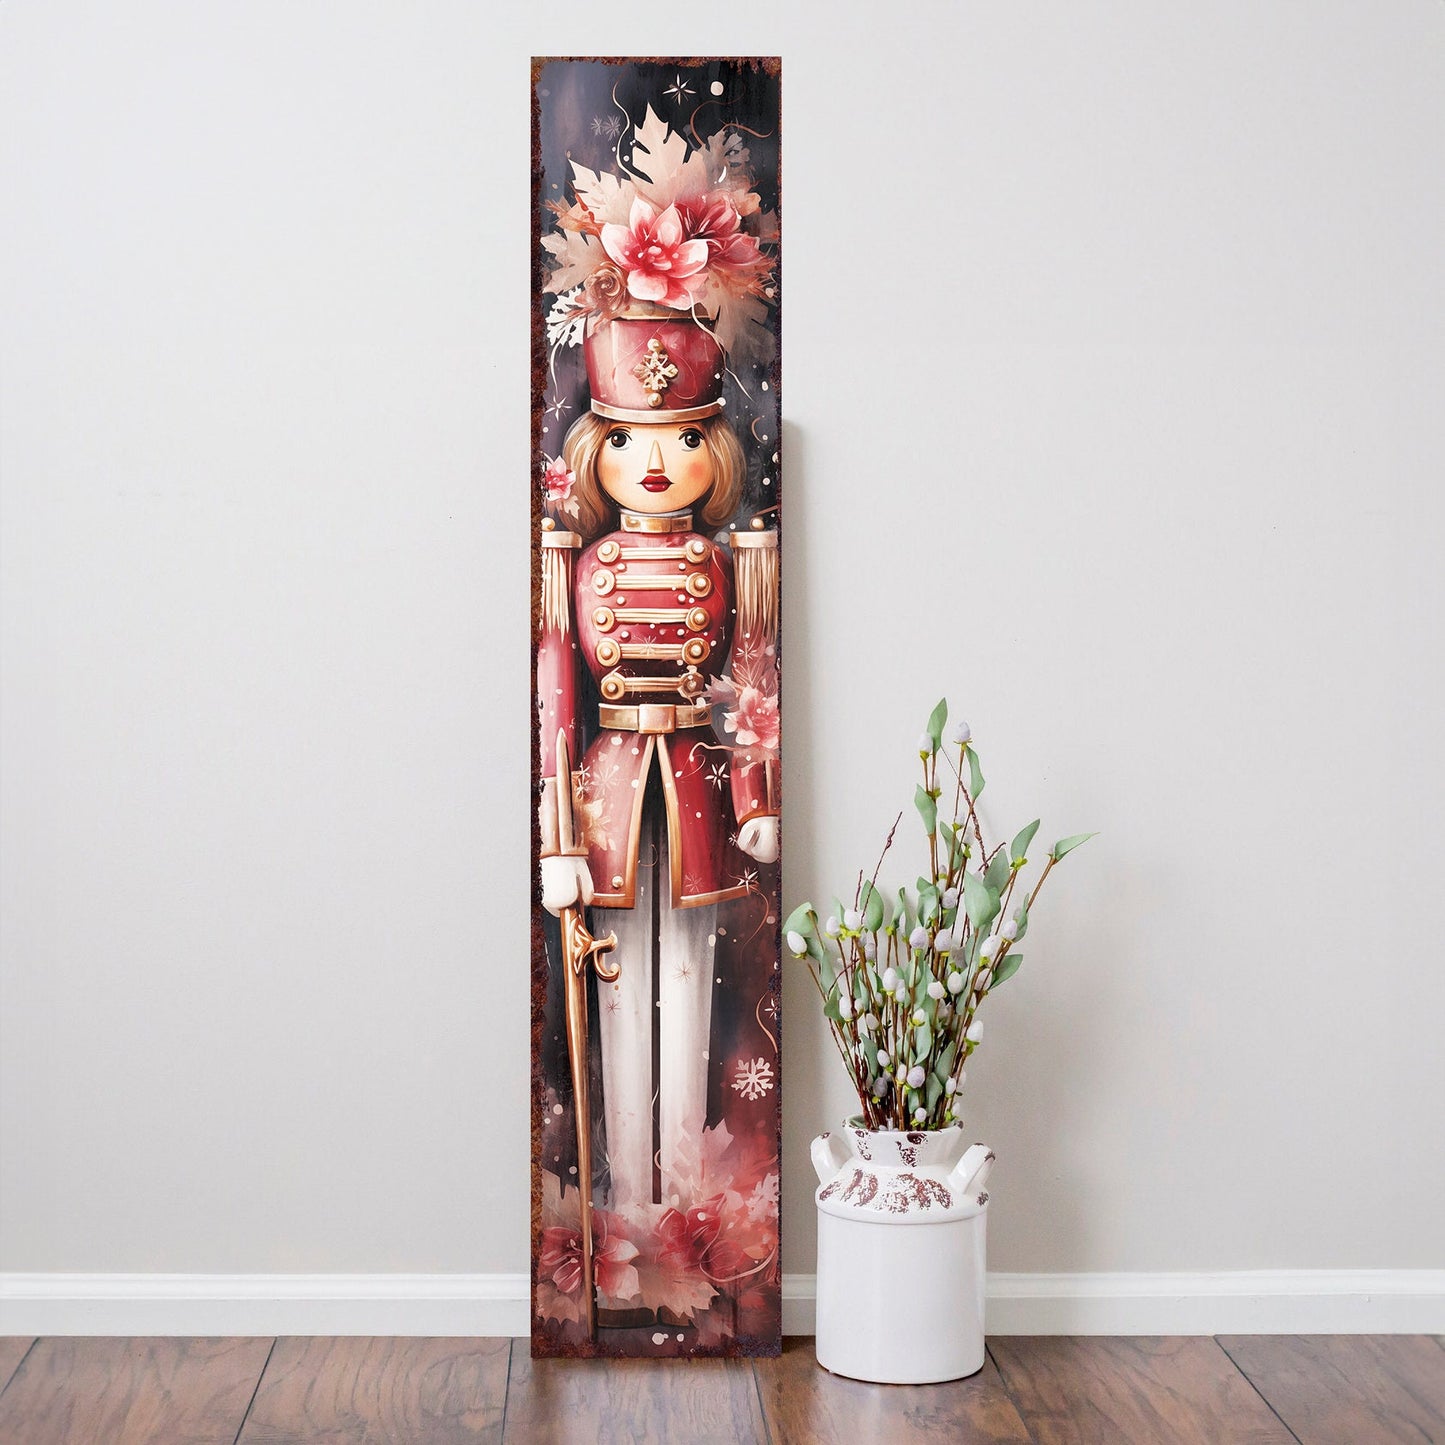 48in Girl Nutcracker Soldier Christmas Sign: Vintage Christmas Decoration for Front Porch - Modern Farmhouse Entryway Decor